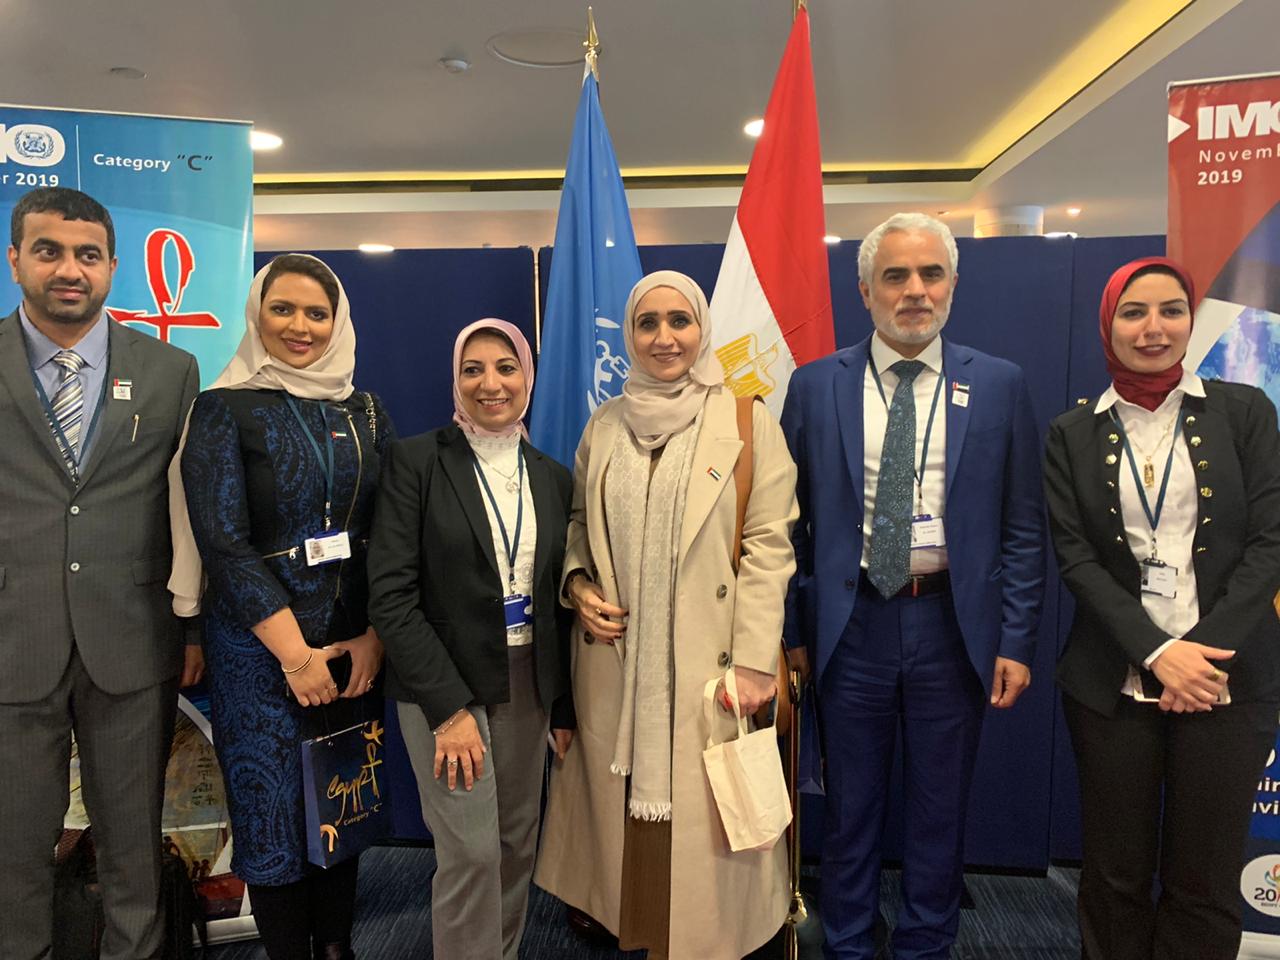 31st General Assembly meeting of the International Maritime Organization (IMO) at its headquarters in London in the presence of HE Eng. Hessa Al Malek, President of the Arab Women Association in the Maritime Sector